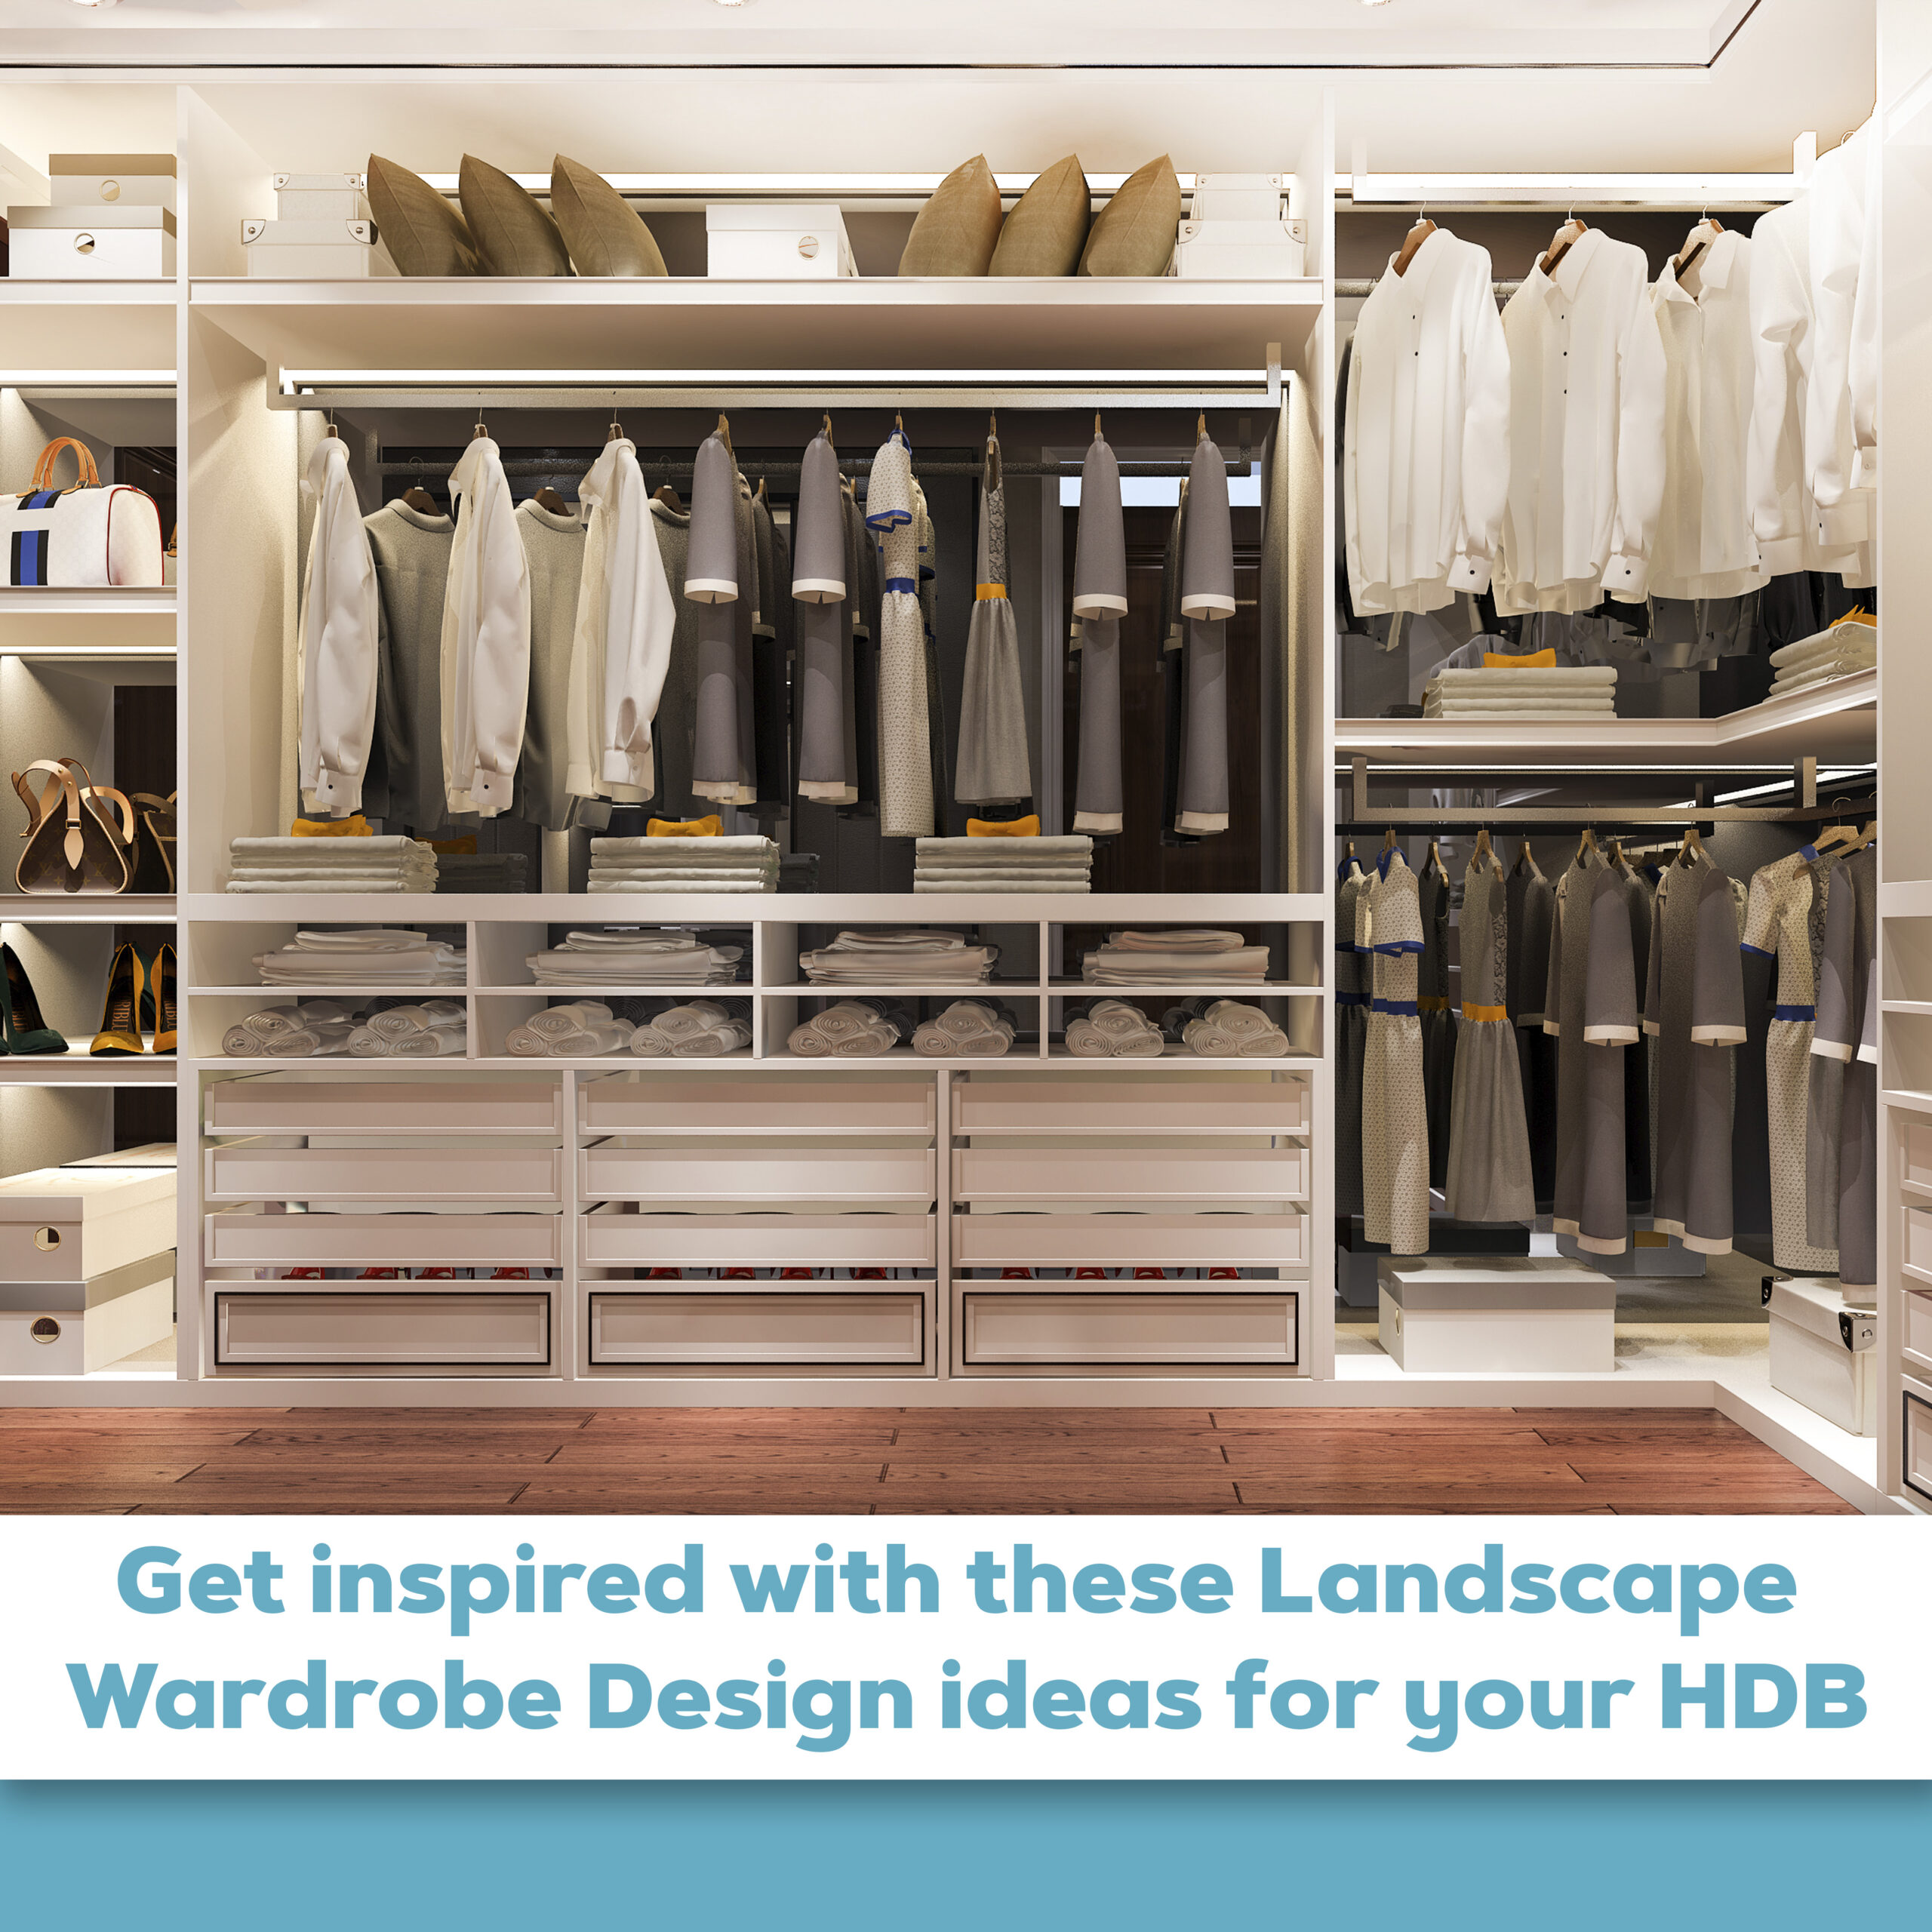 Get inspired with these Landscape Wardrobe Design ideas for your HDB